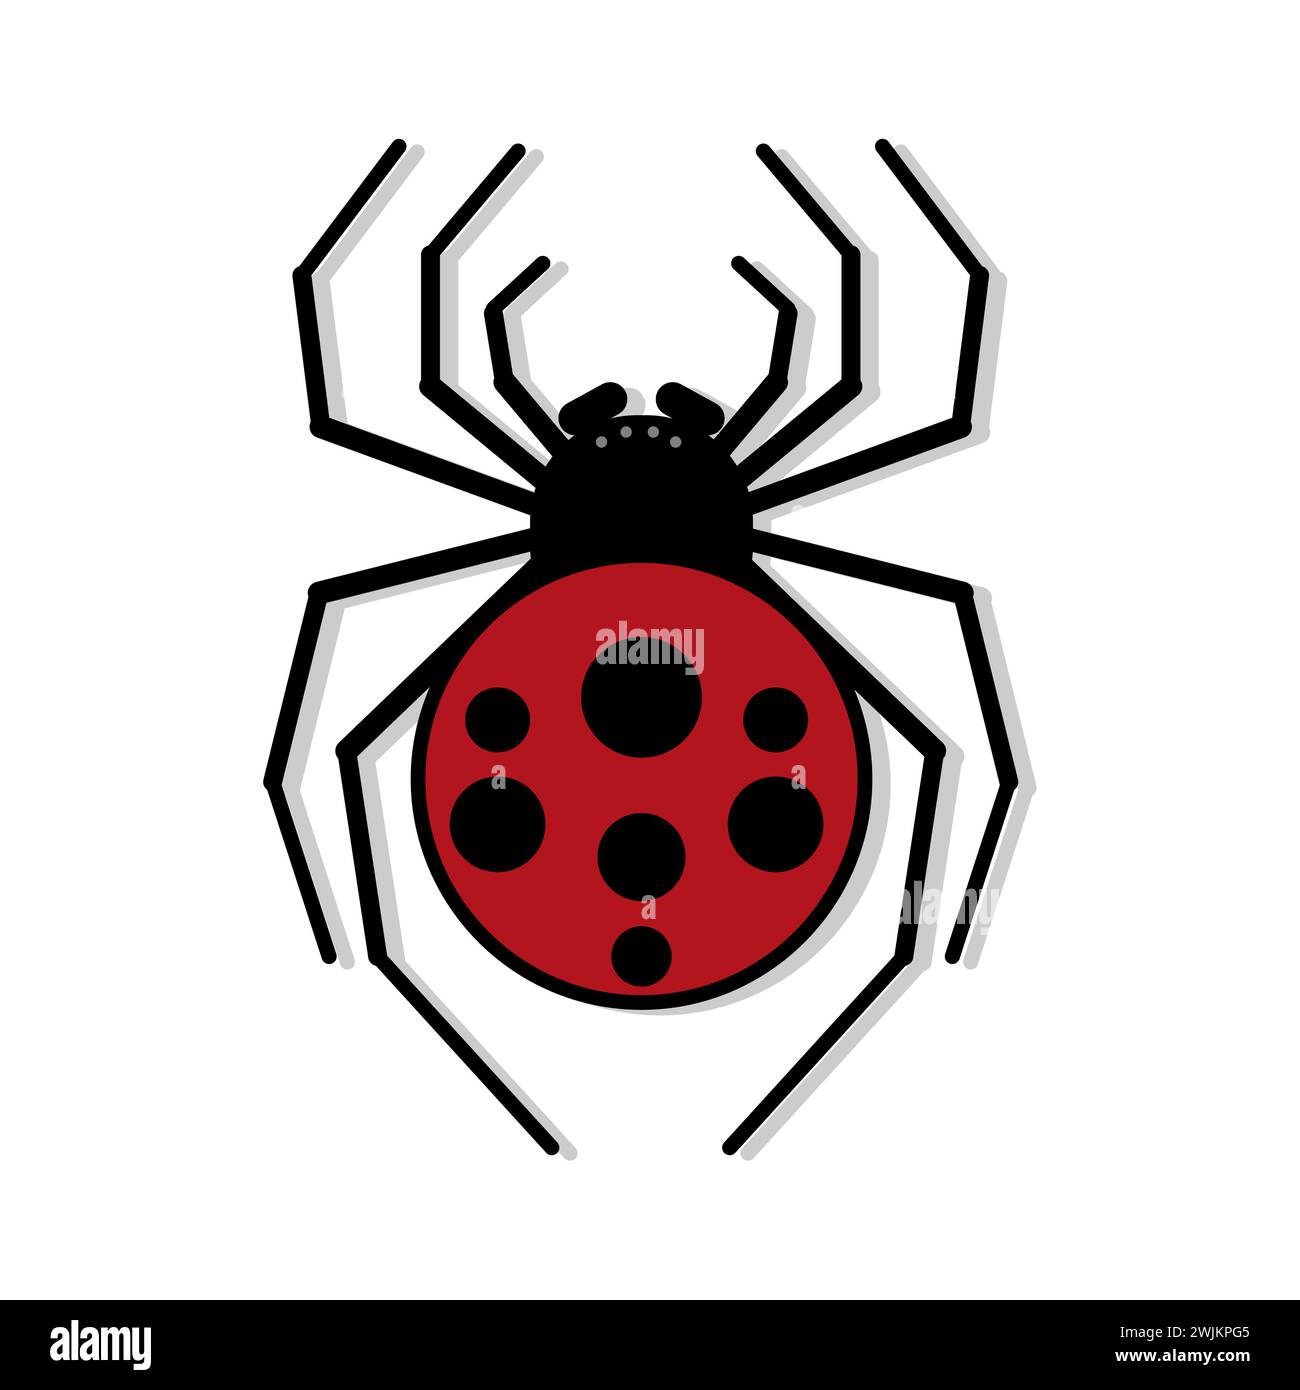 art illustration symbol macot animal icon design nature concept insect of spider Stock Vector